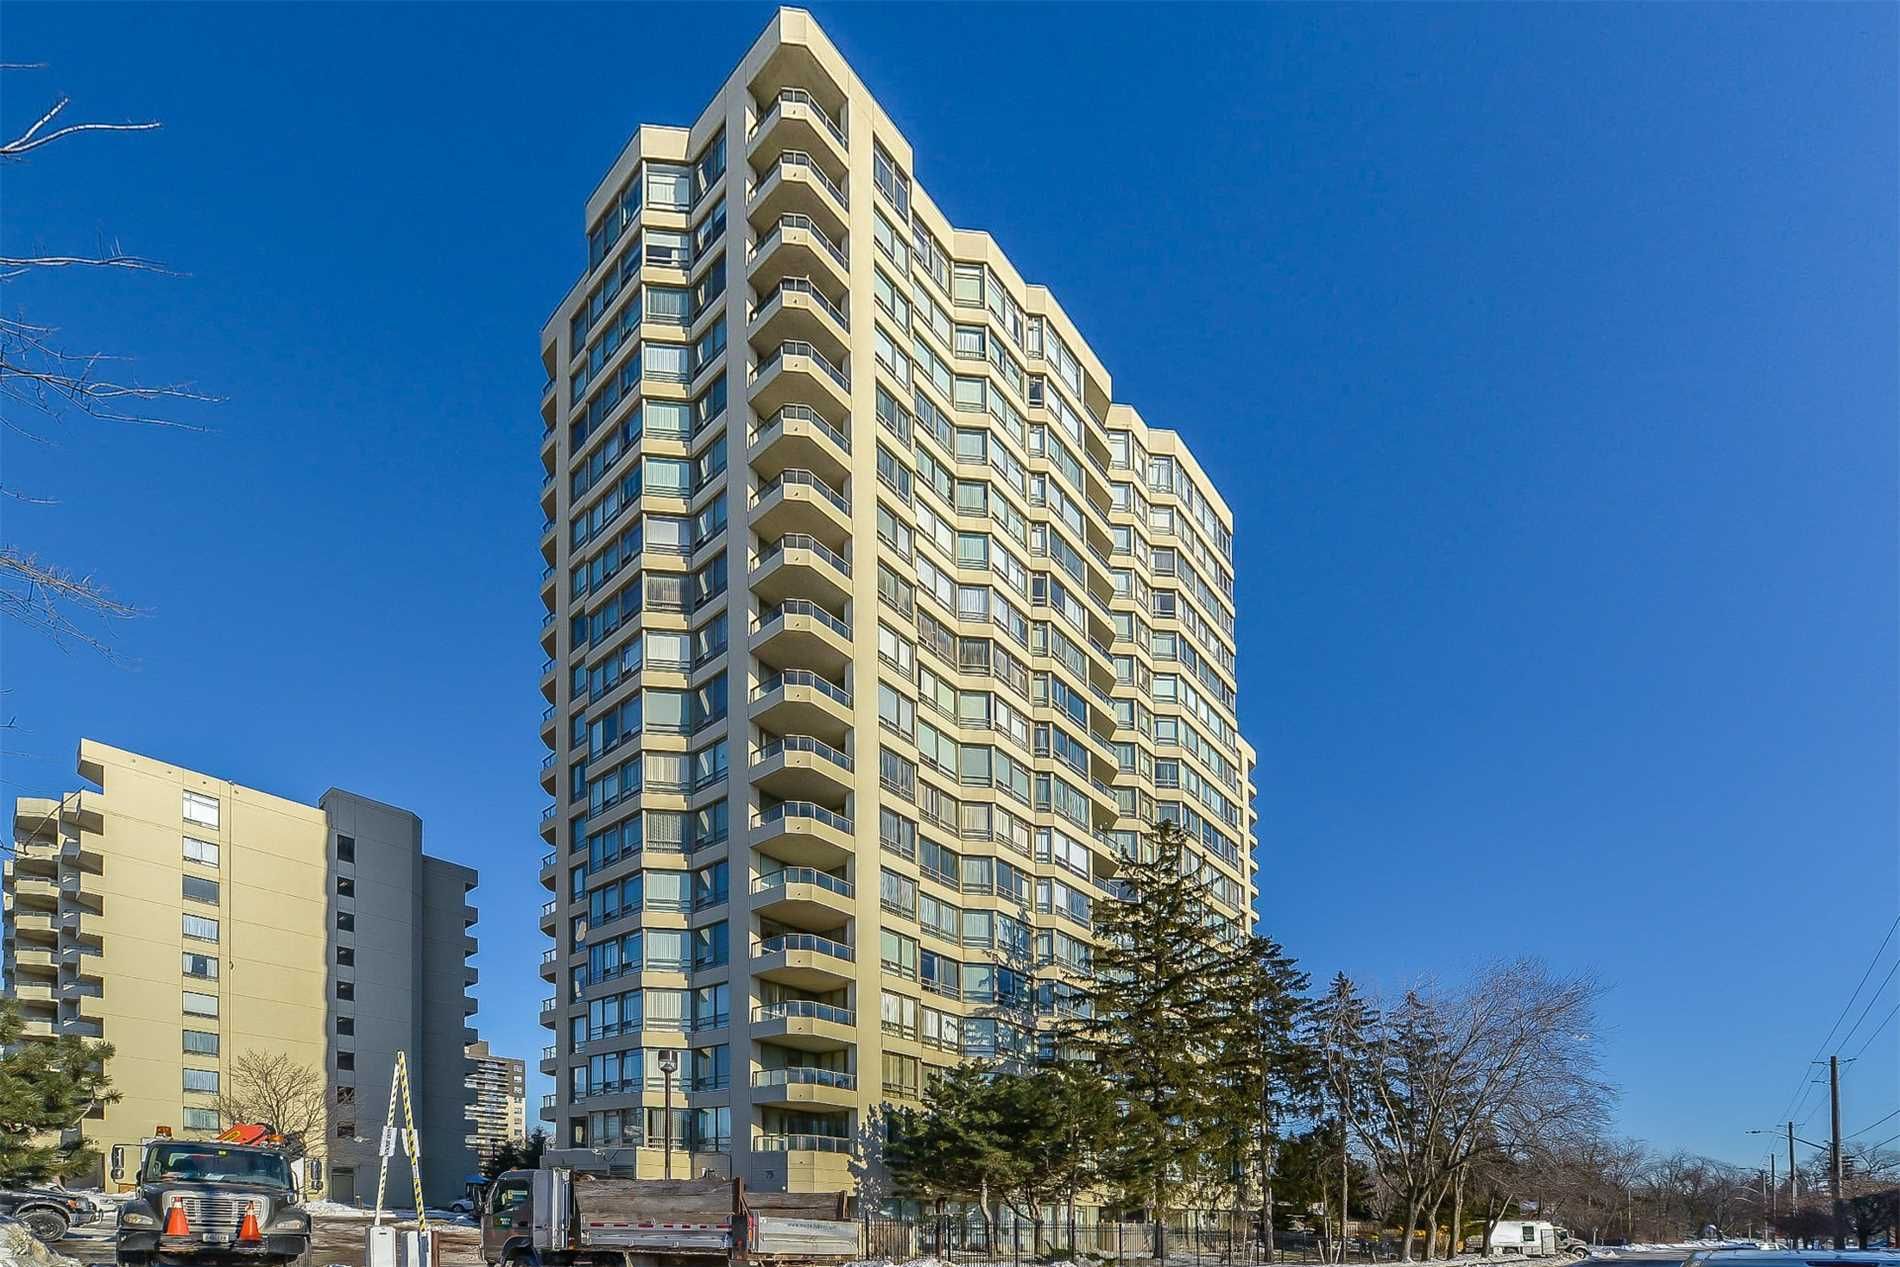 75 King St E. This condo at King Gardens Condos is located in  Mississauga, Toronto - image #1 of 2 by Strata.ca